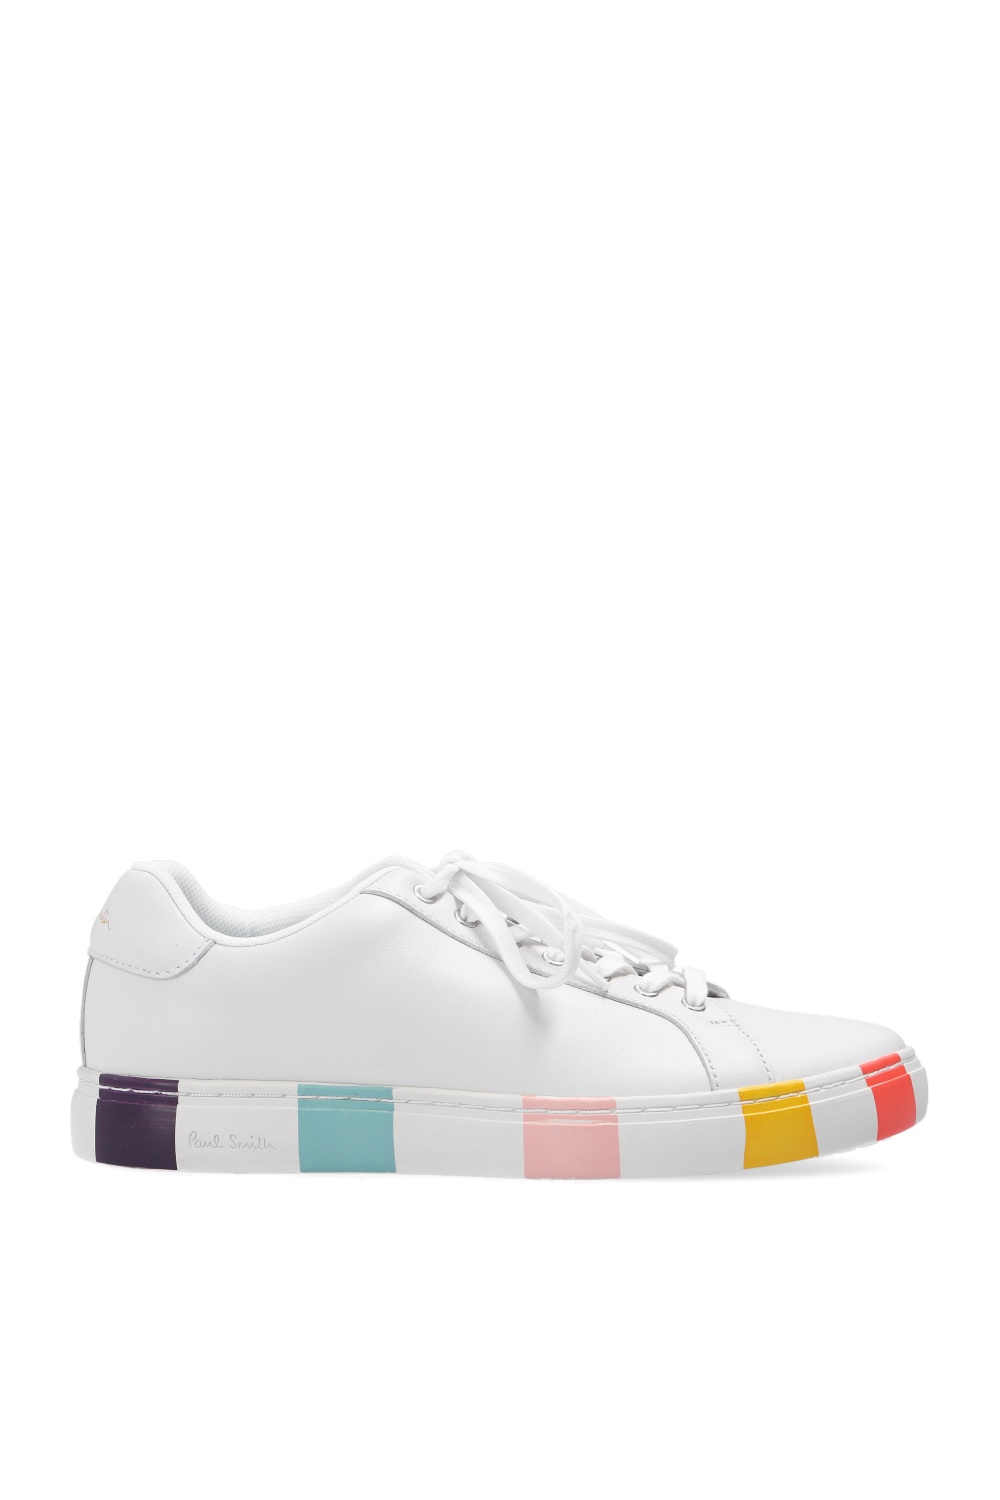 paul smith white lapin trainers